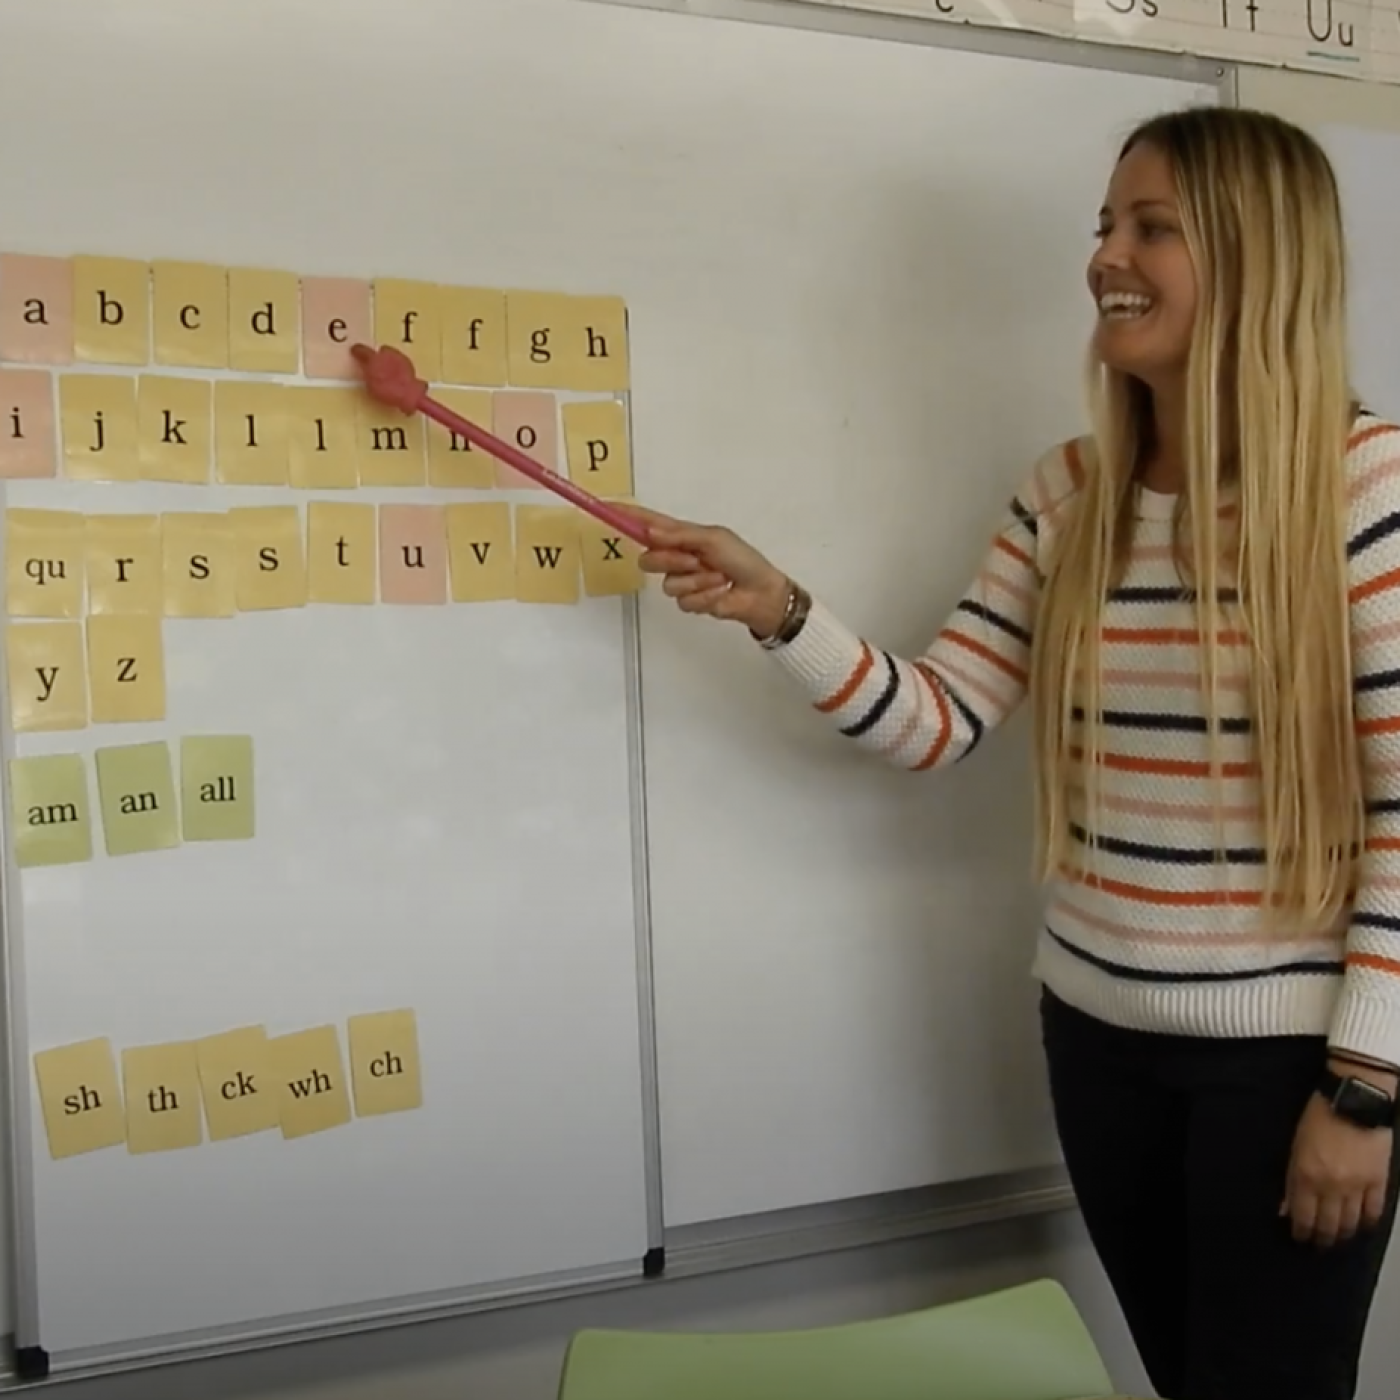 A teacher with a pointer in front of a whiteboard